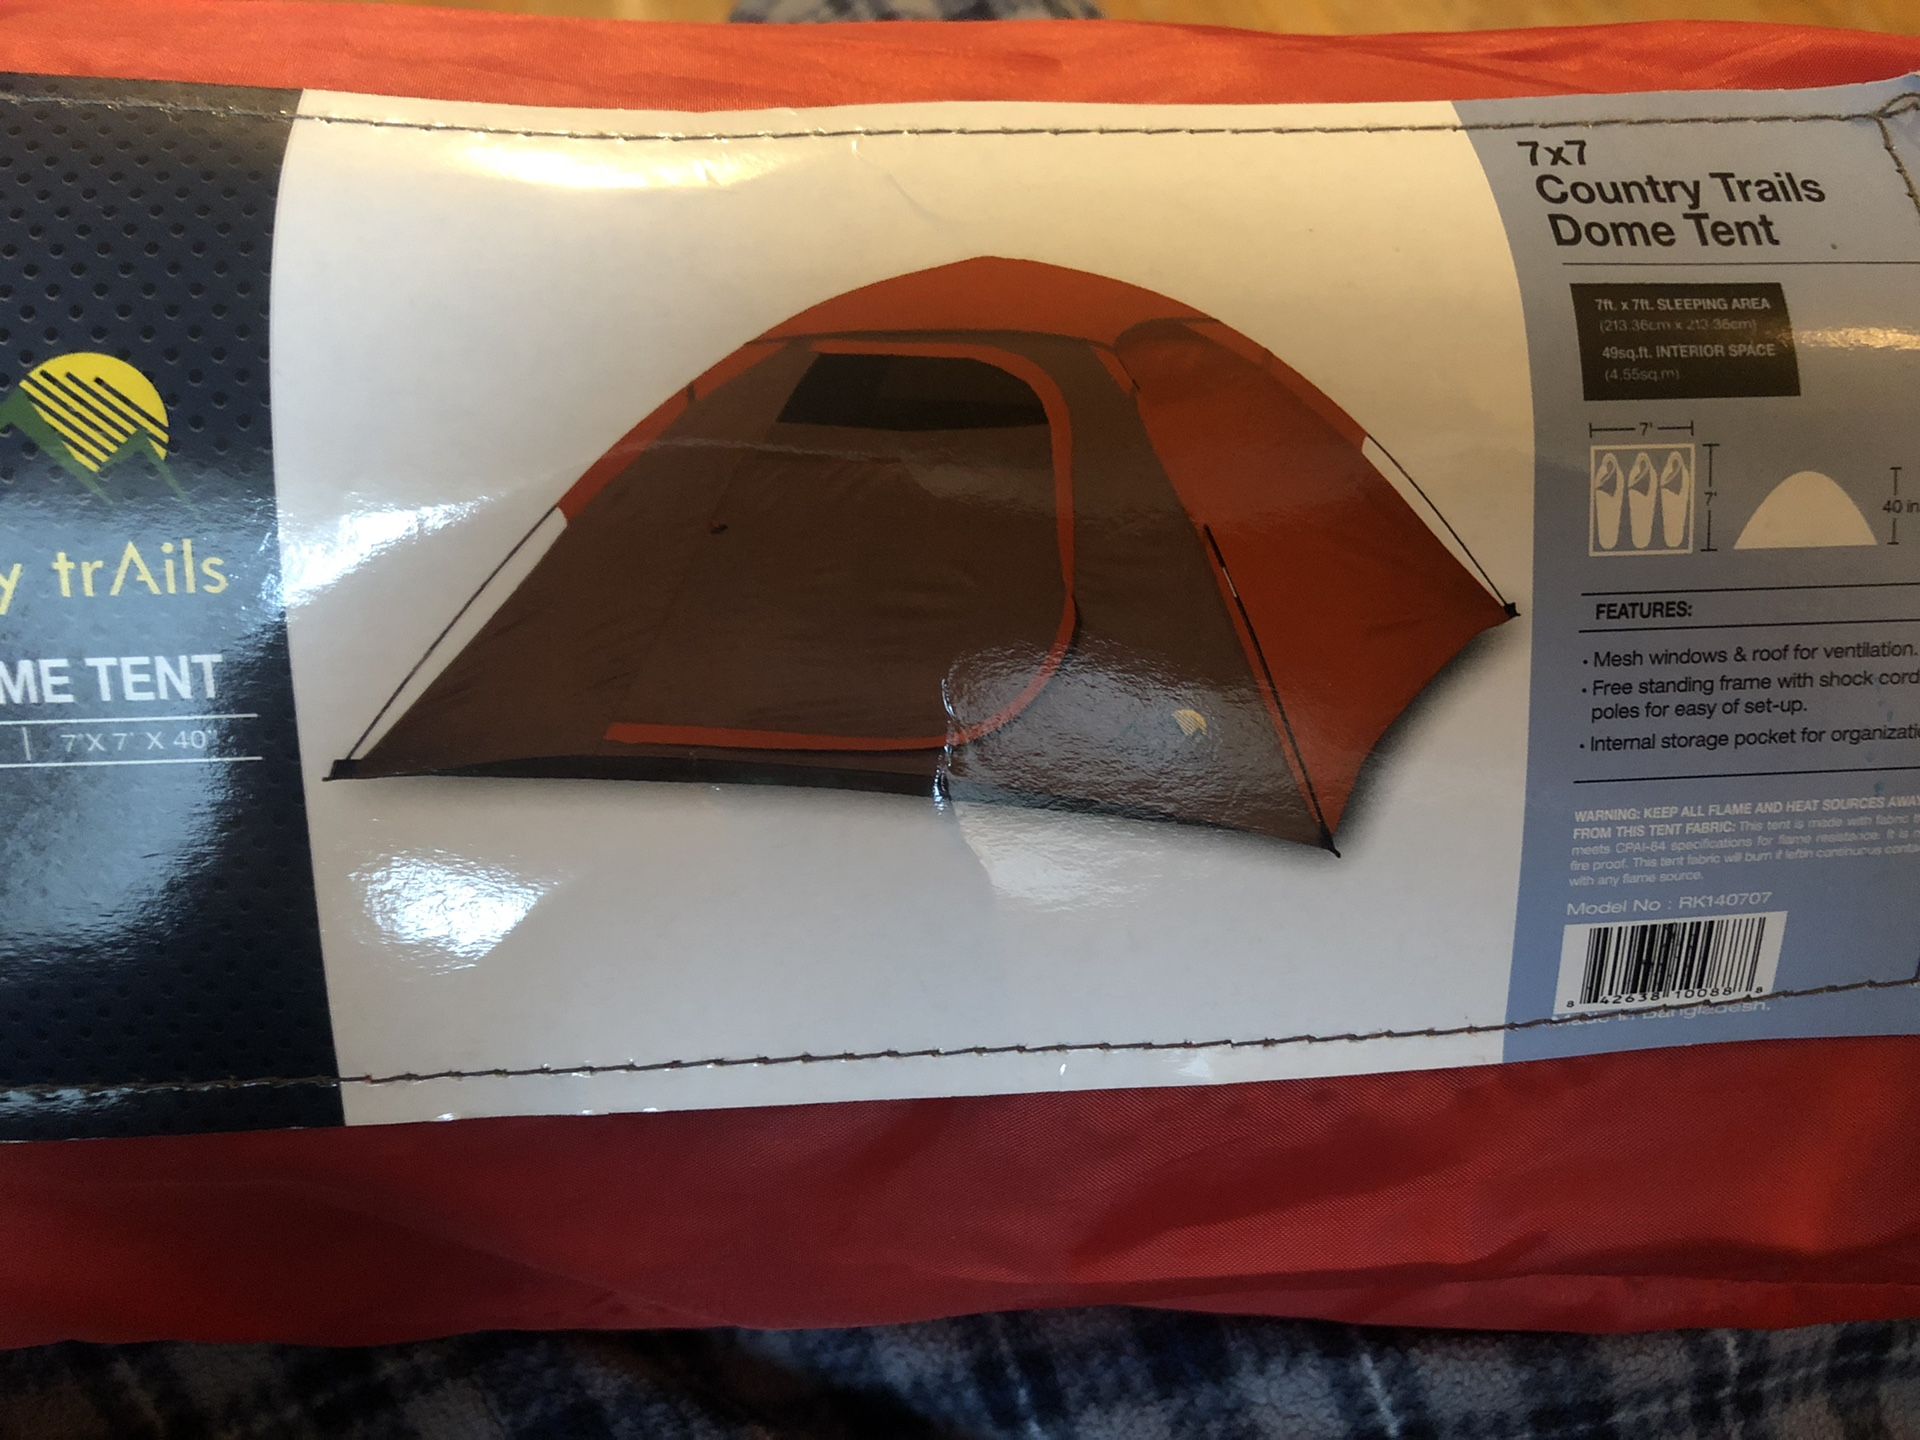 Country Trails 7x7 Dome Tent